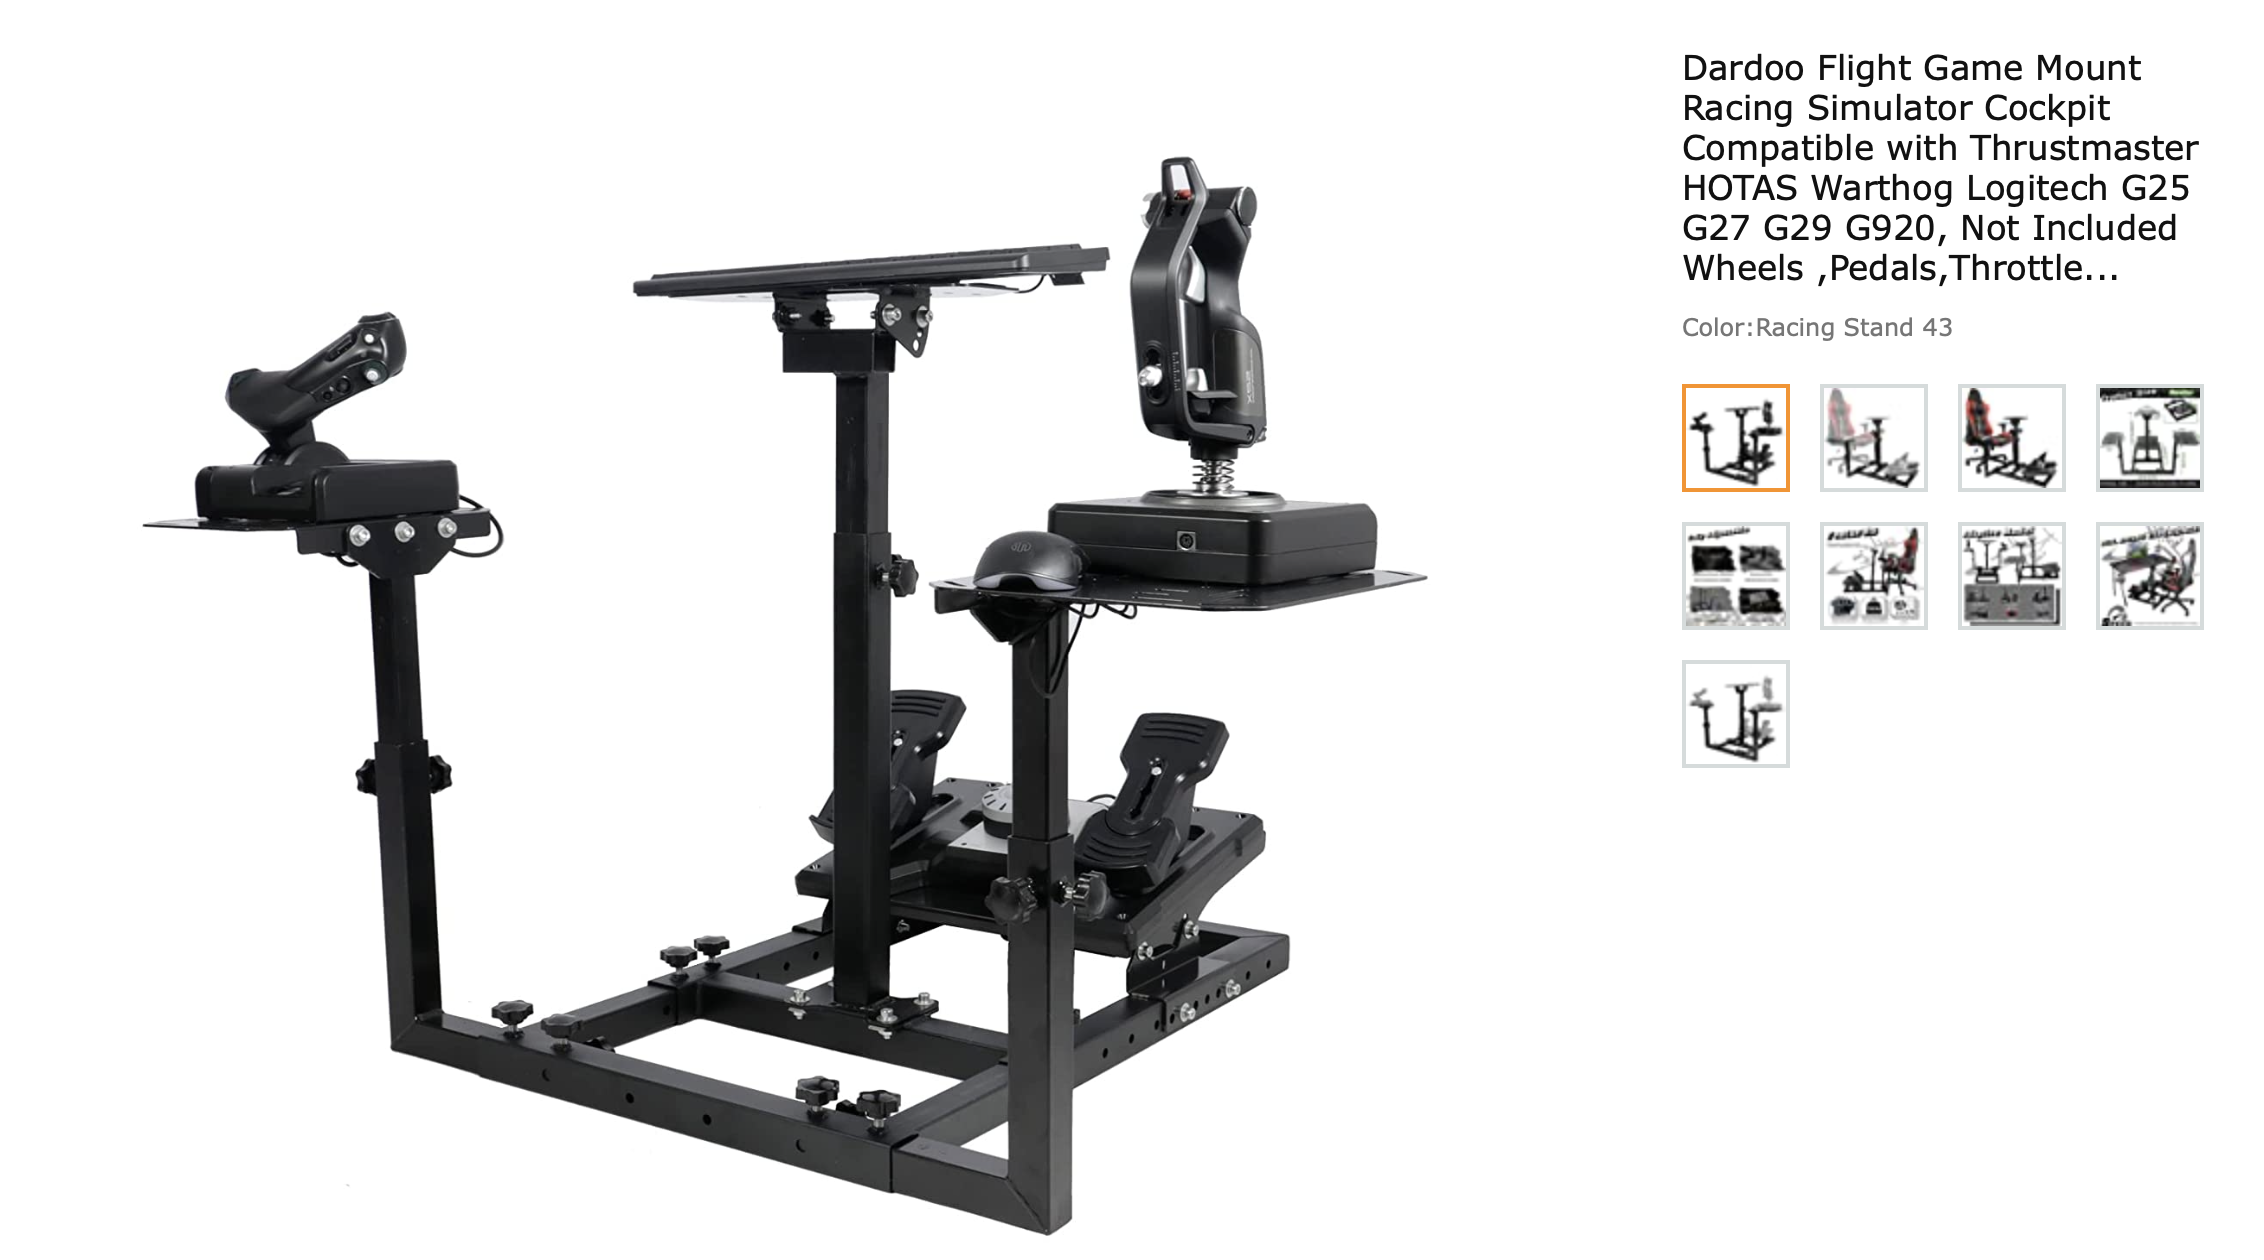 Dardoo Flight Game Mount Racing Simulator Cockpit Compatible with Thrustmaster HOTAS Warthog Logitech G25 G27 G29 G920, Not Included Wheels,Pedals,Thr